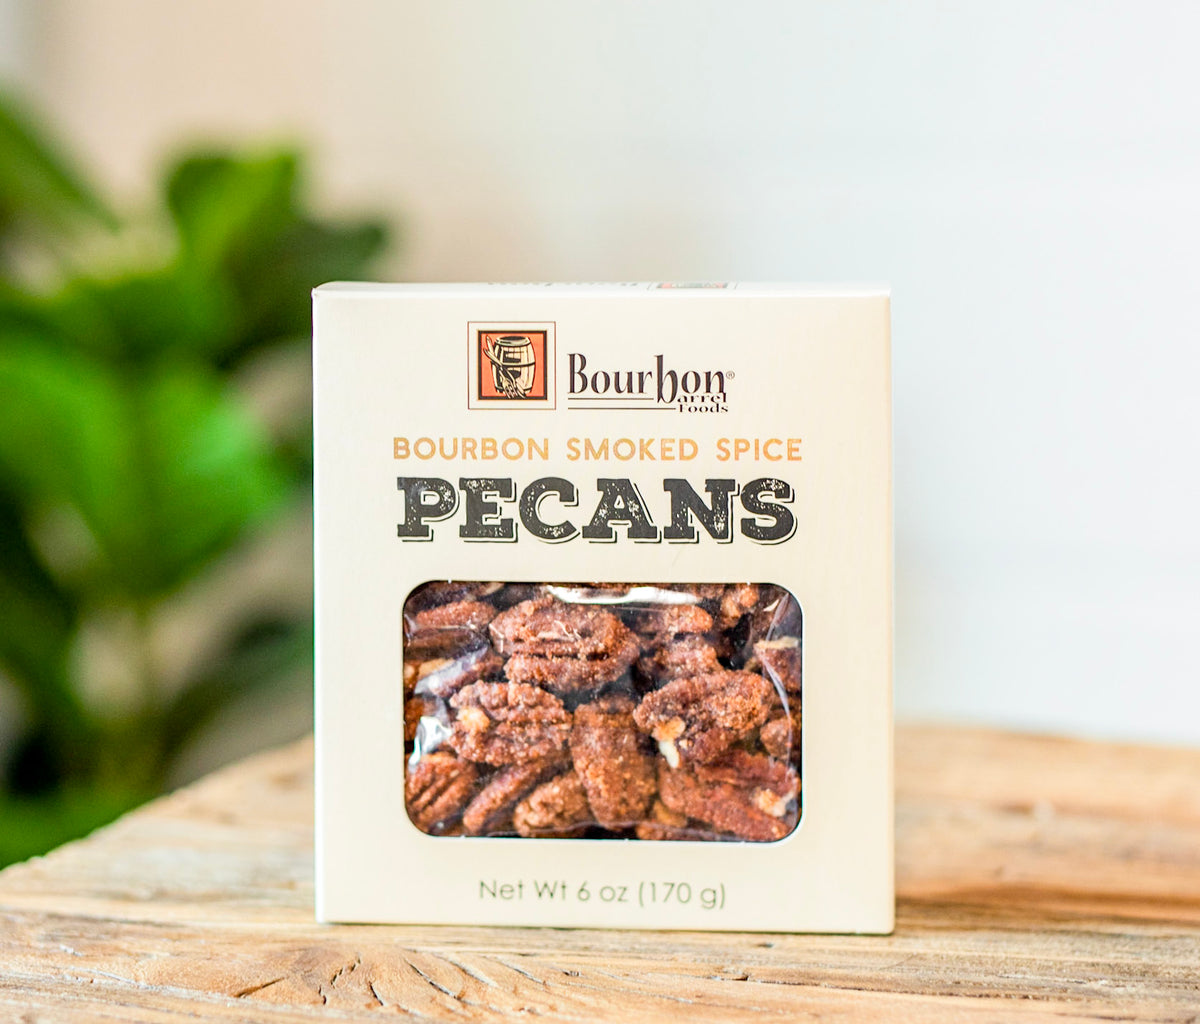 Bourbon Smoked Spiced Pecans